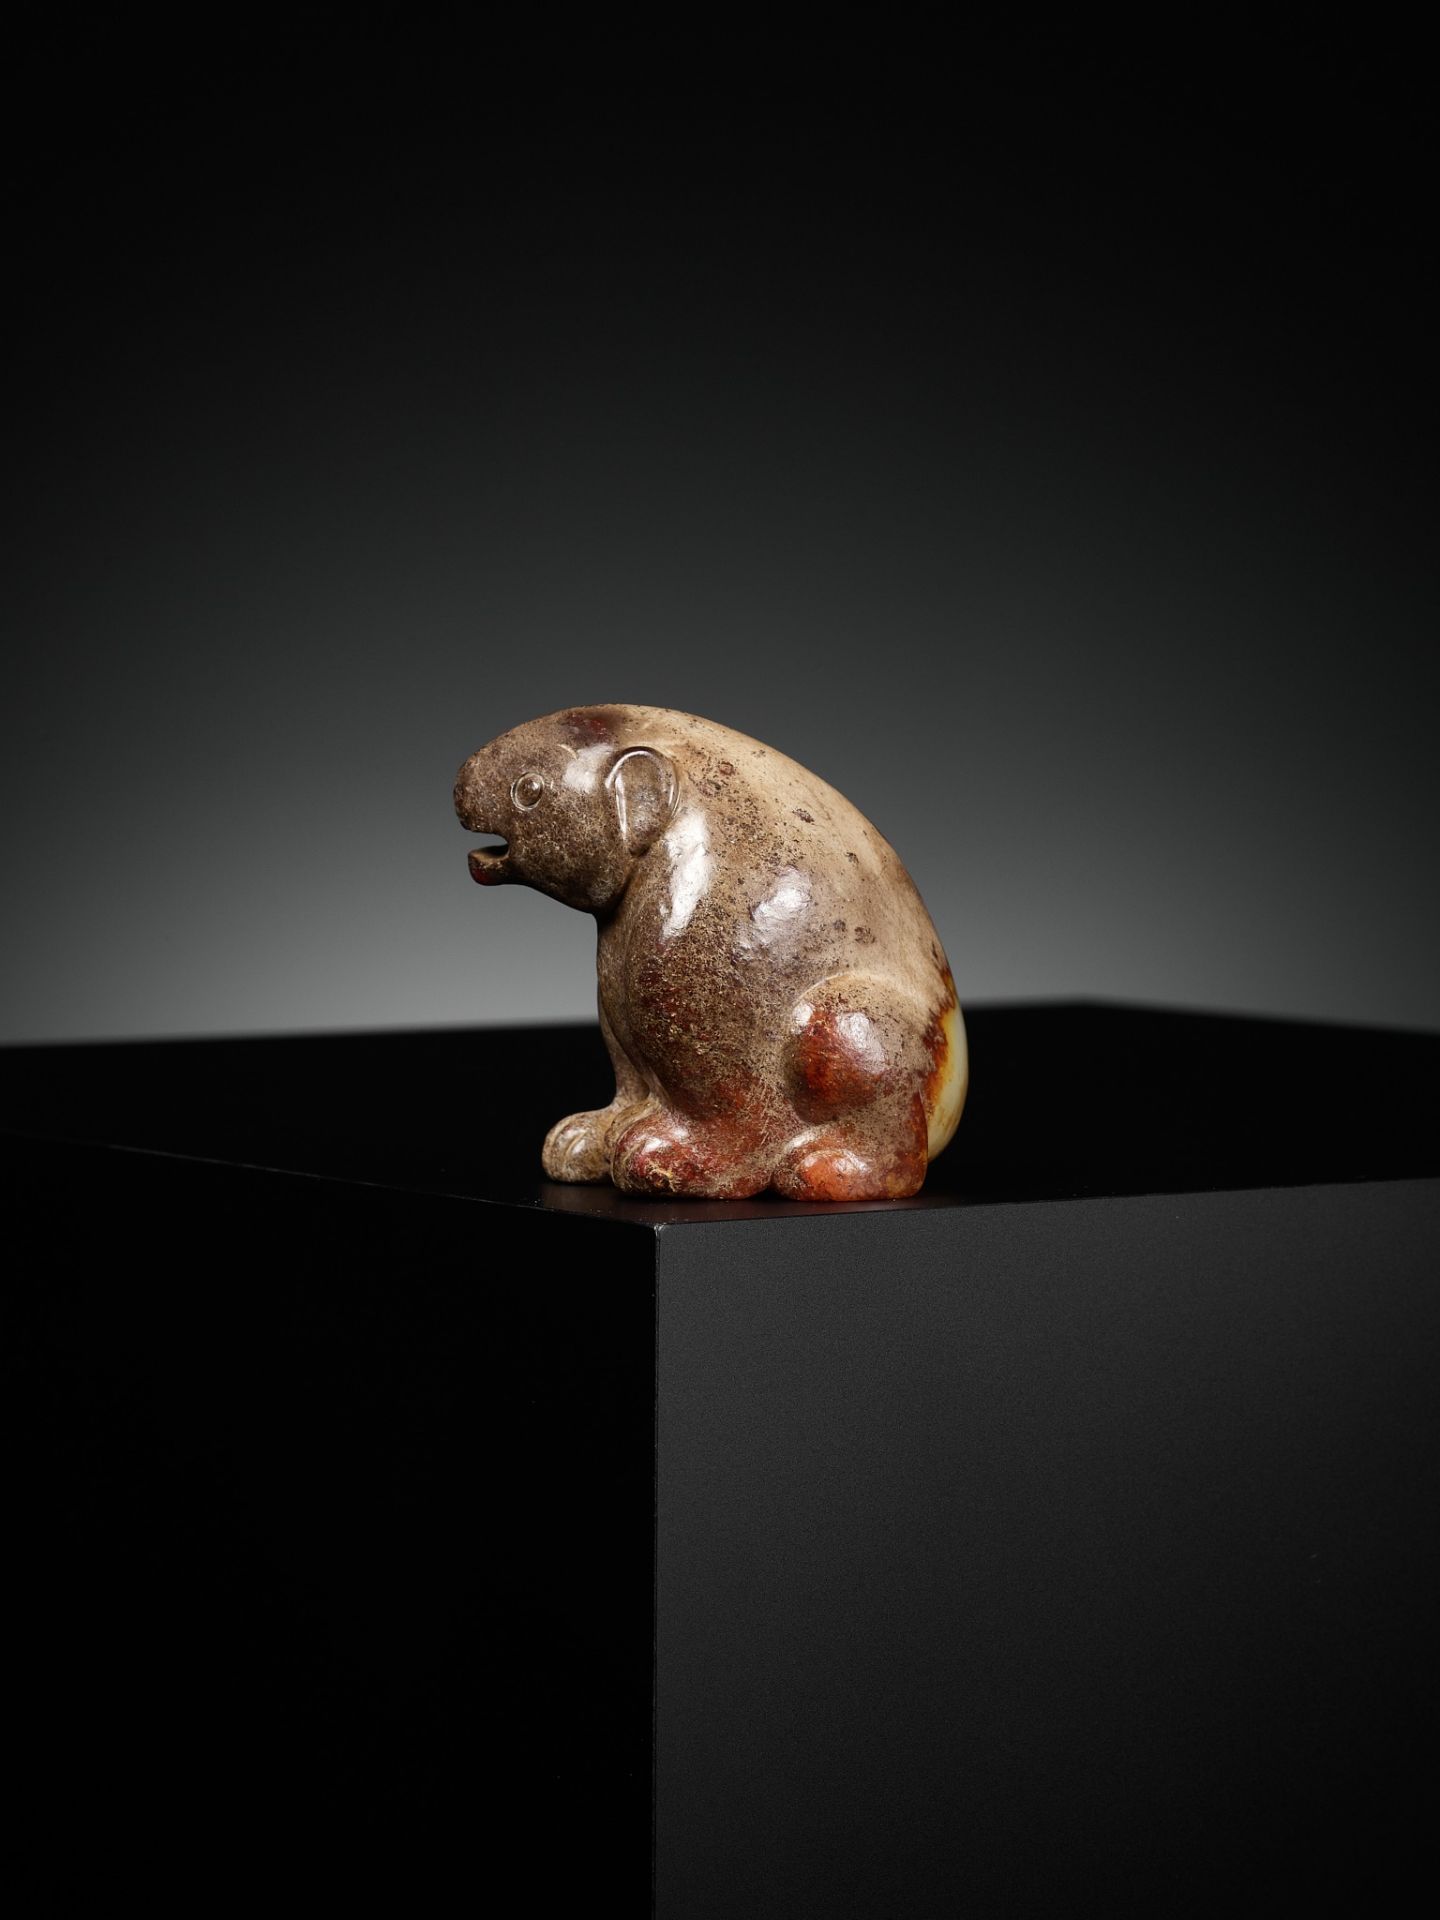 AN EXCEPTIONAL YELLOW JADE FIGURE OF A BEAR, HUANGXIONG, HAN DYNASTY, CHINA, 202 BC - 220 AD - Bild 13 aus 19